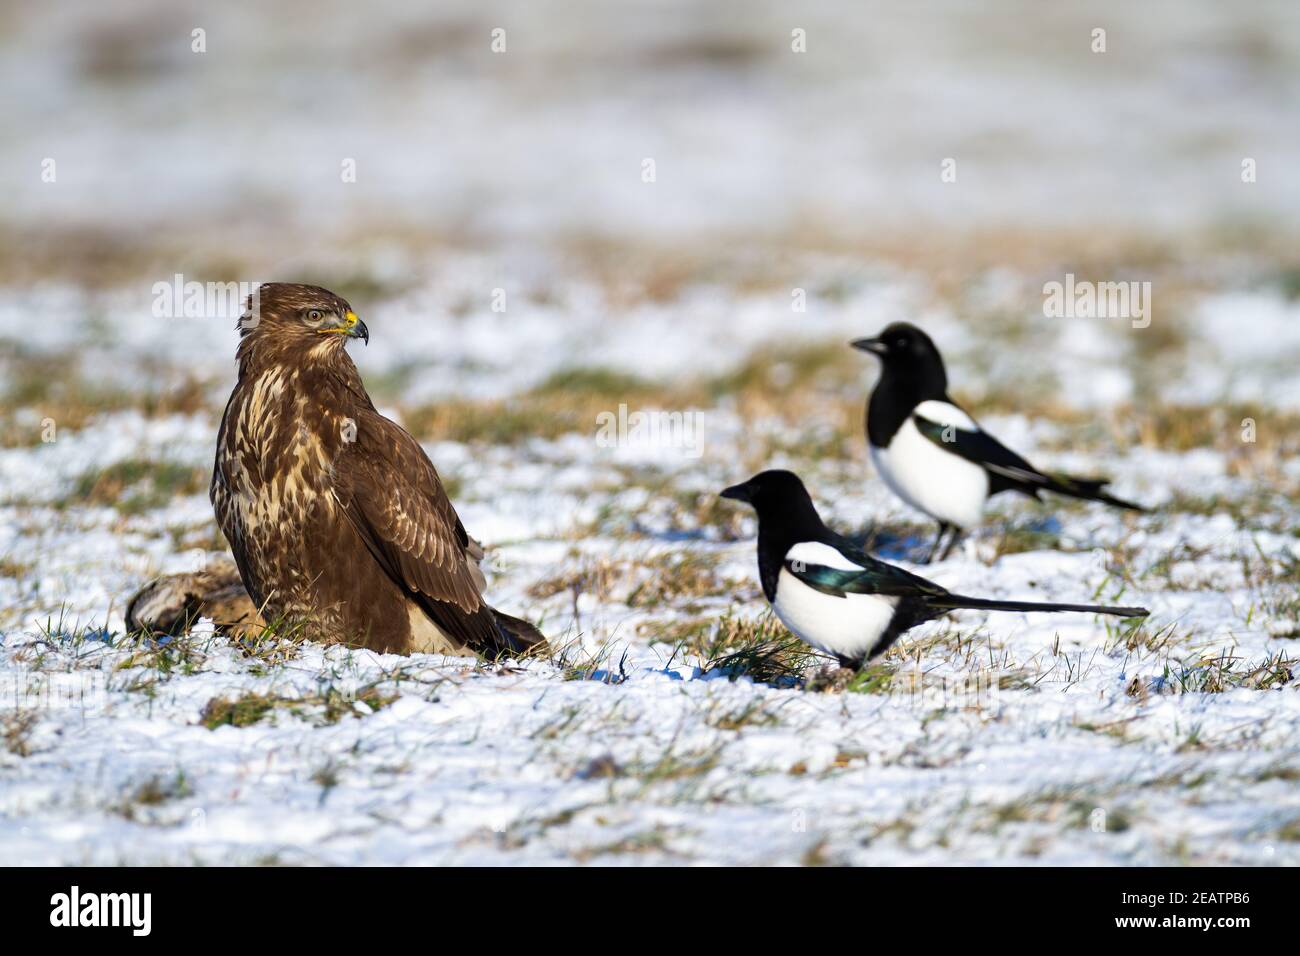 Adult common buzzard with its prey disturbed by annoying eurasian magpies Stock Photo